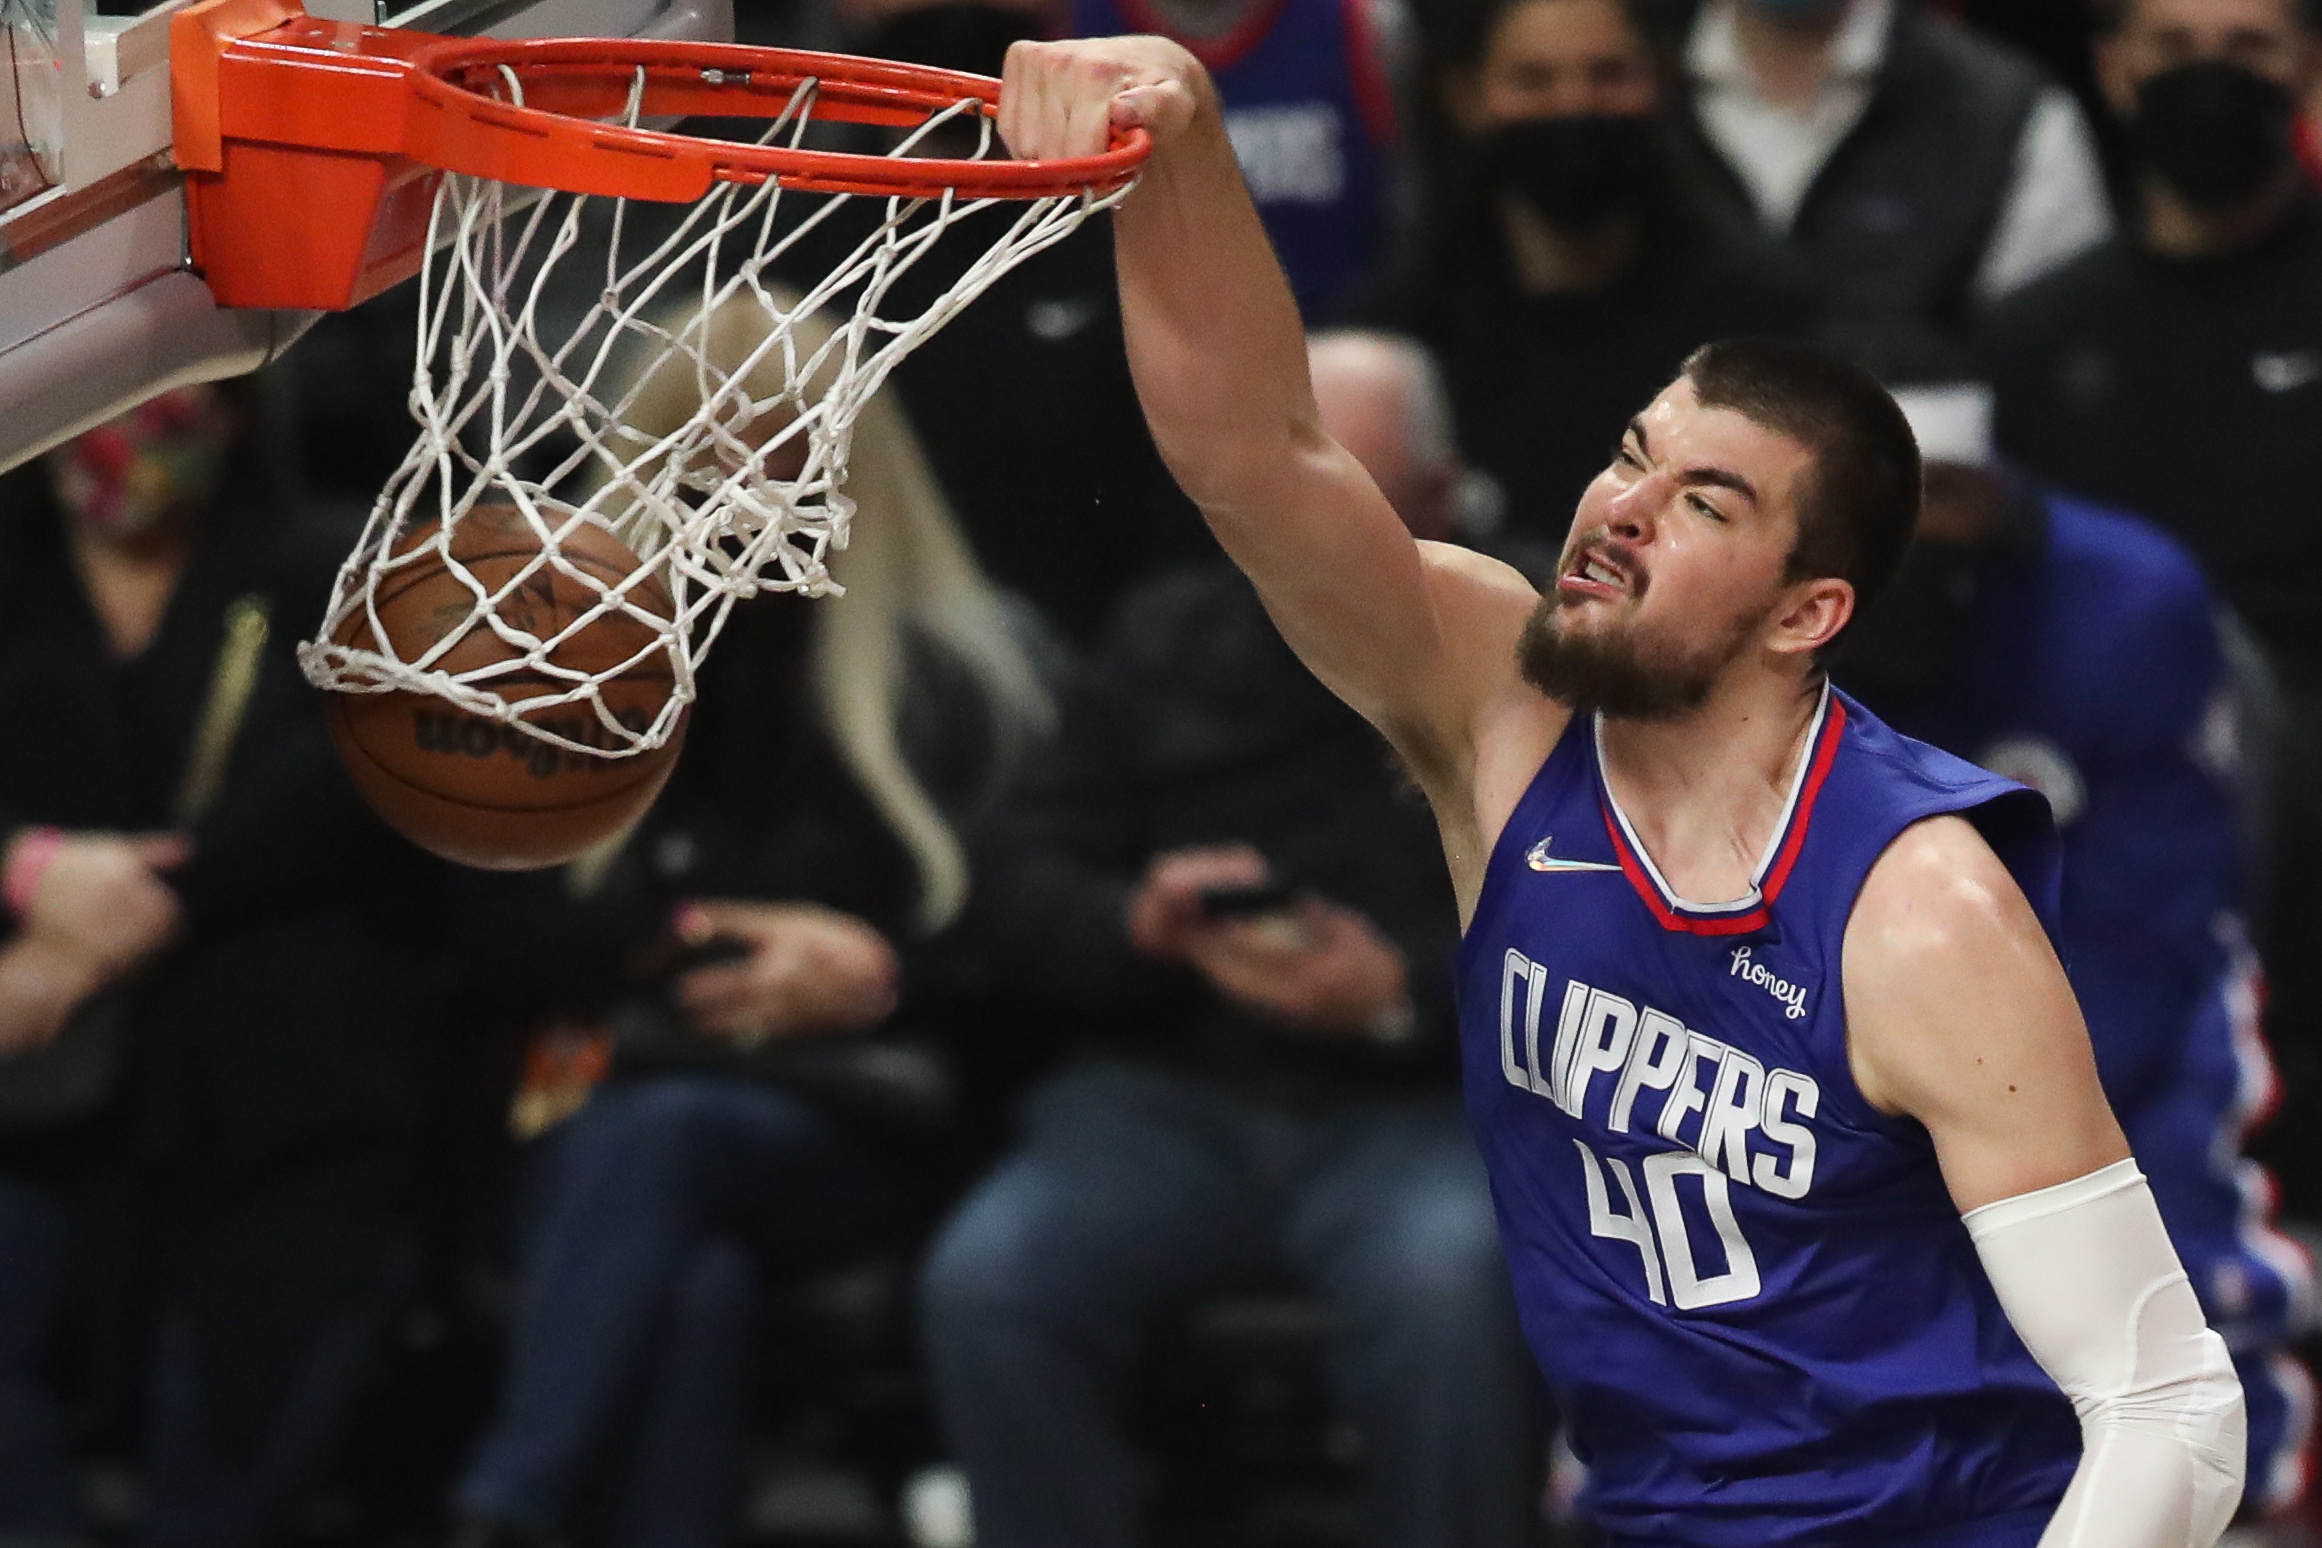 epa09652135 LA Clippers center Ivica Zubac scores against the San Antonio Spurs during the first quarter of the NBA basketball game between the Los Angeles Clippers and San Antonio Spurs at the Staples Center in Los Angeles, California, USA, 20 December 2021.  EPA/CAROLINE BREHMAN  SHUTTERSTOCK OUT